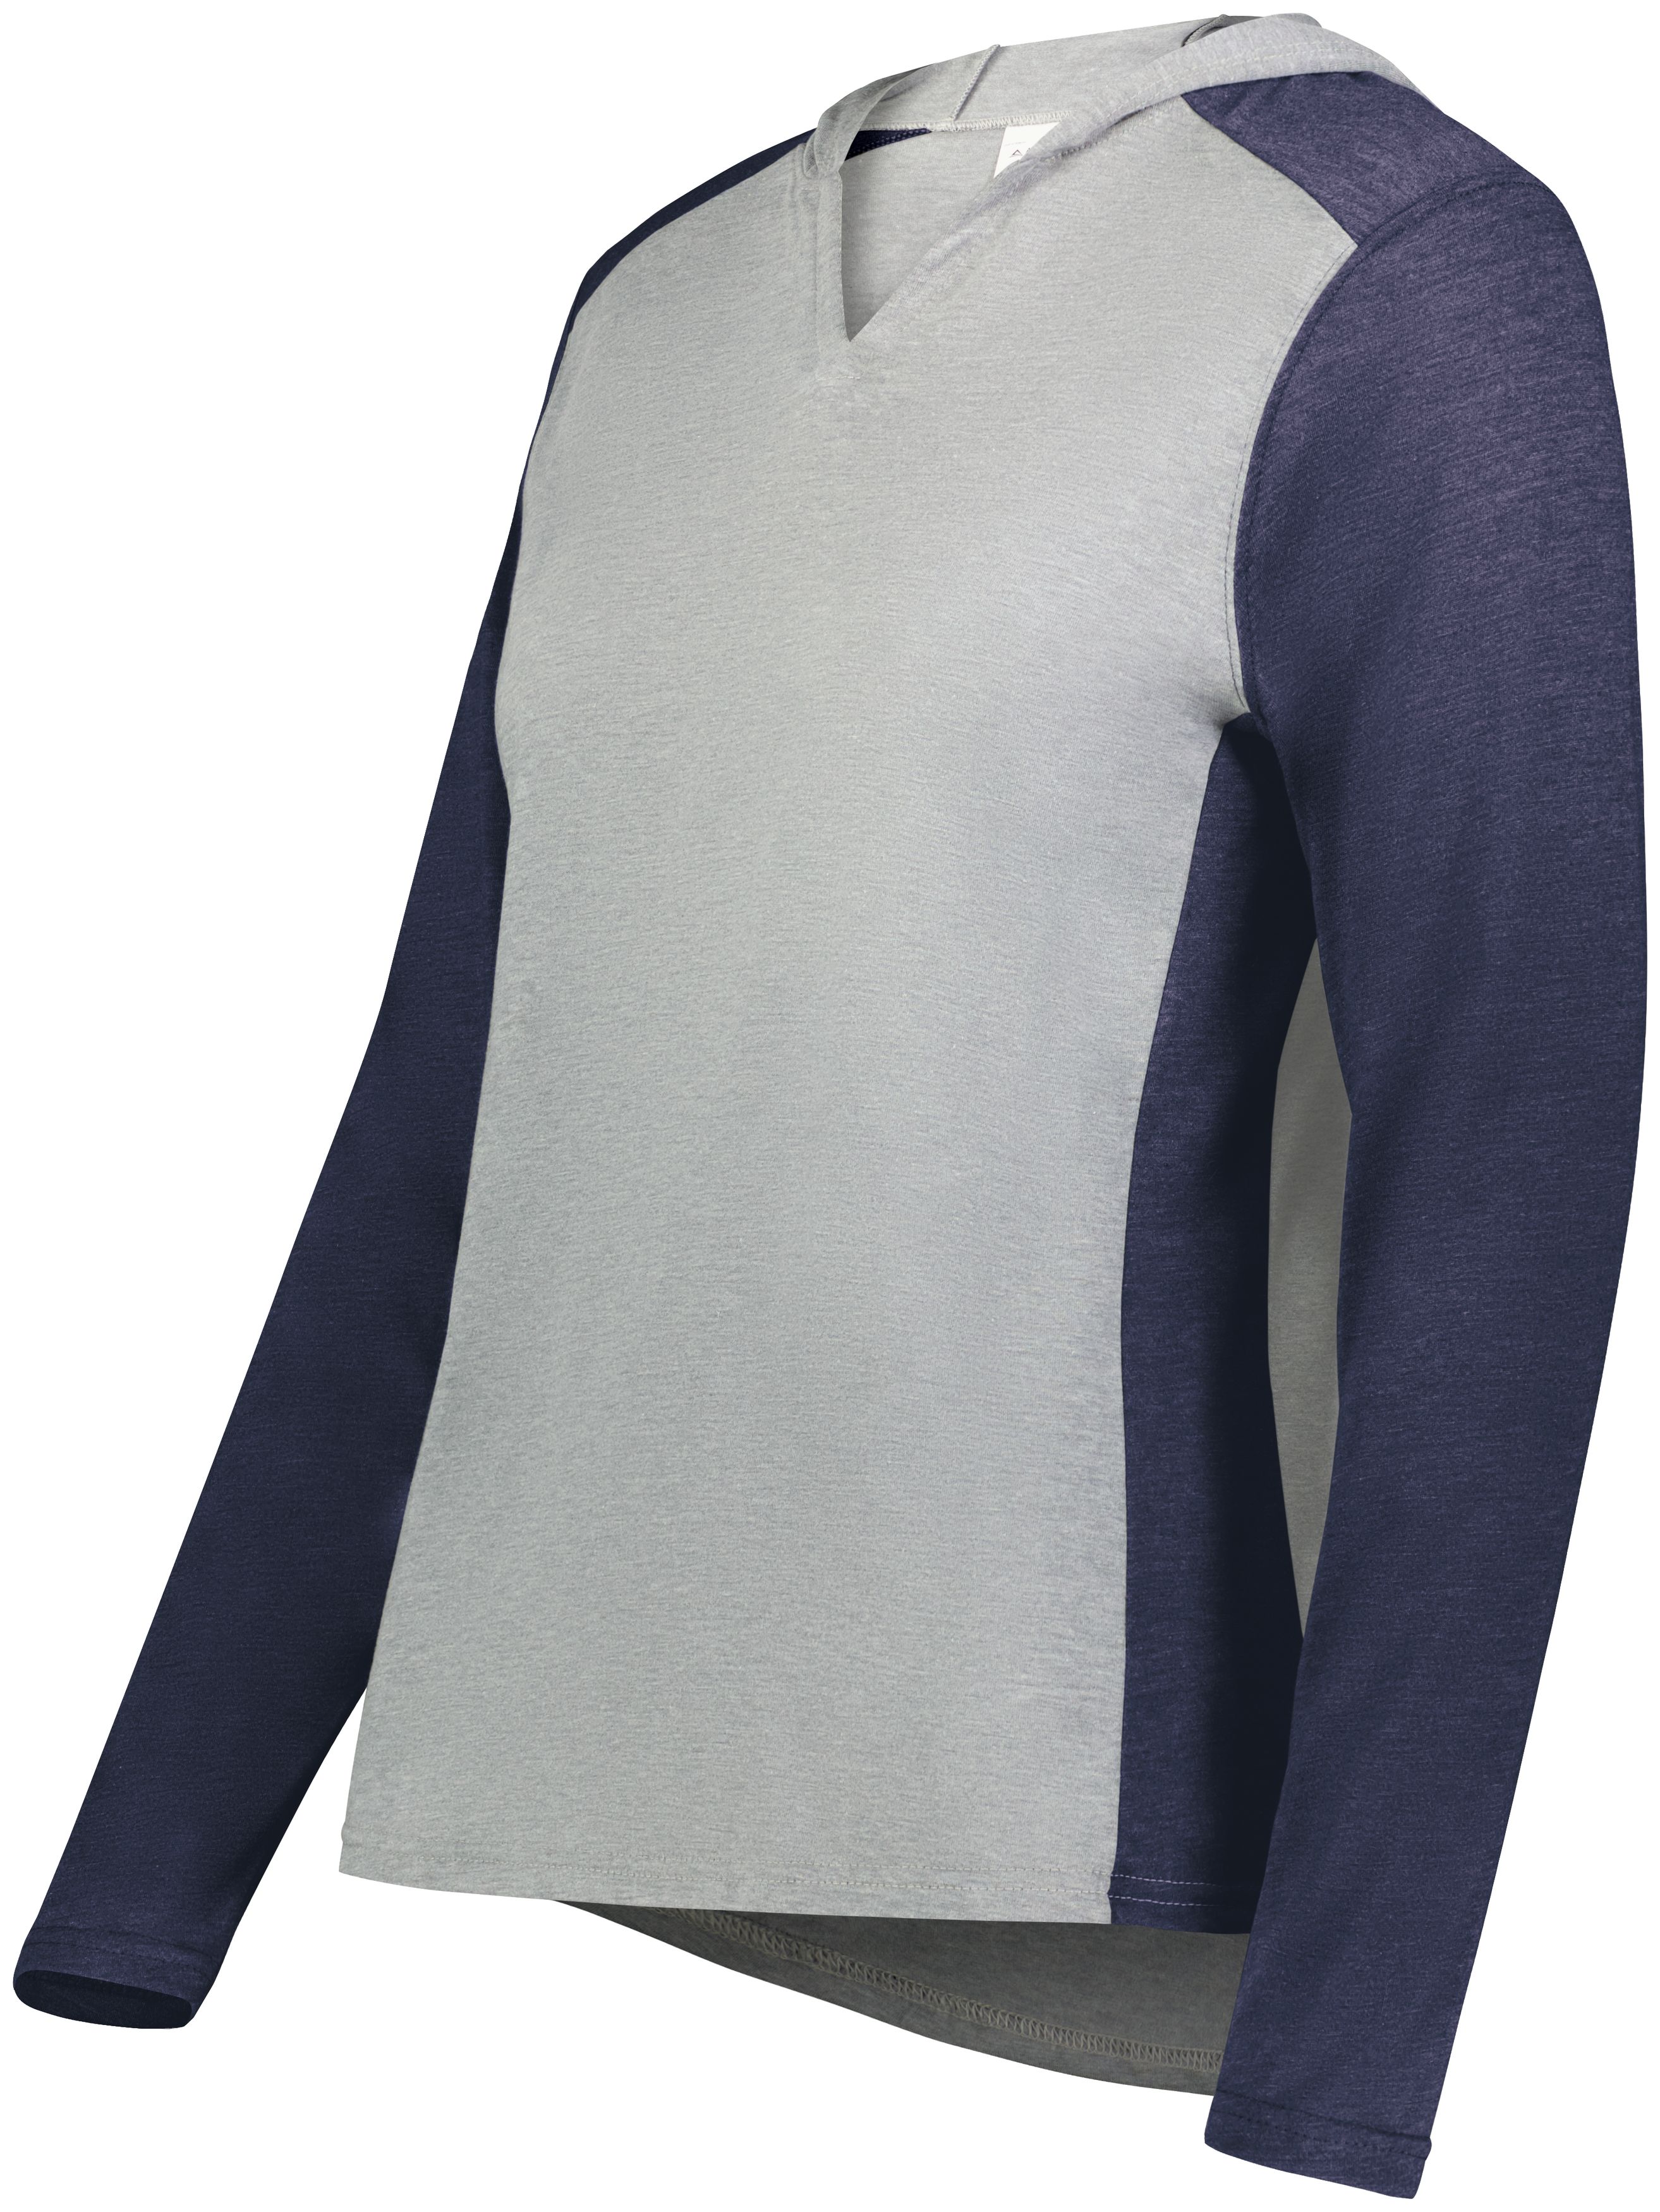 click to view Grey Heather/Navy Heather